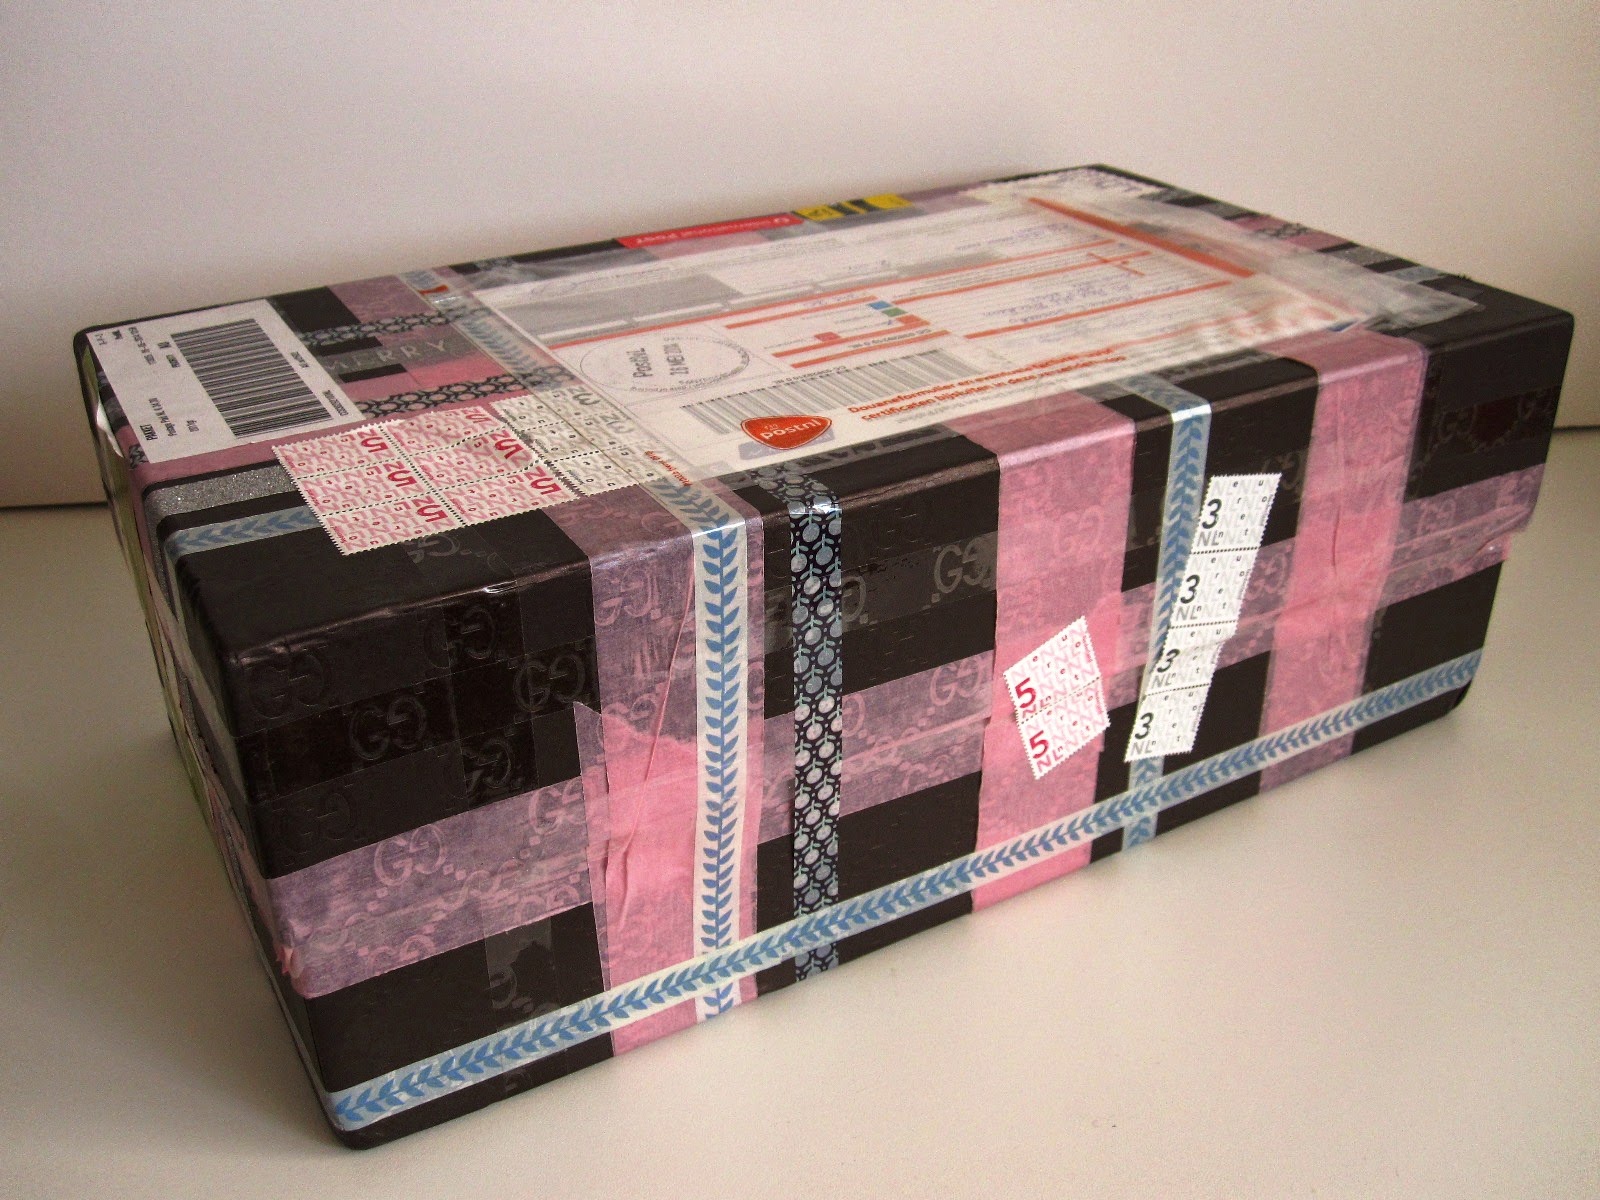 Large shoe box, wrapped with various washi tapes.There are postal sticker on the top of it.